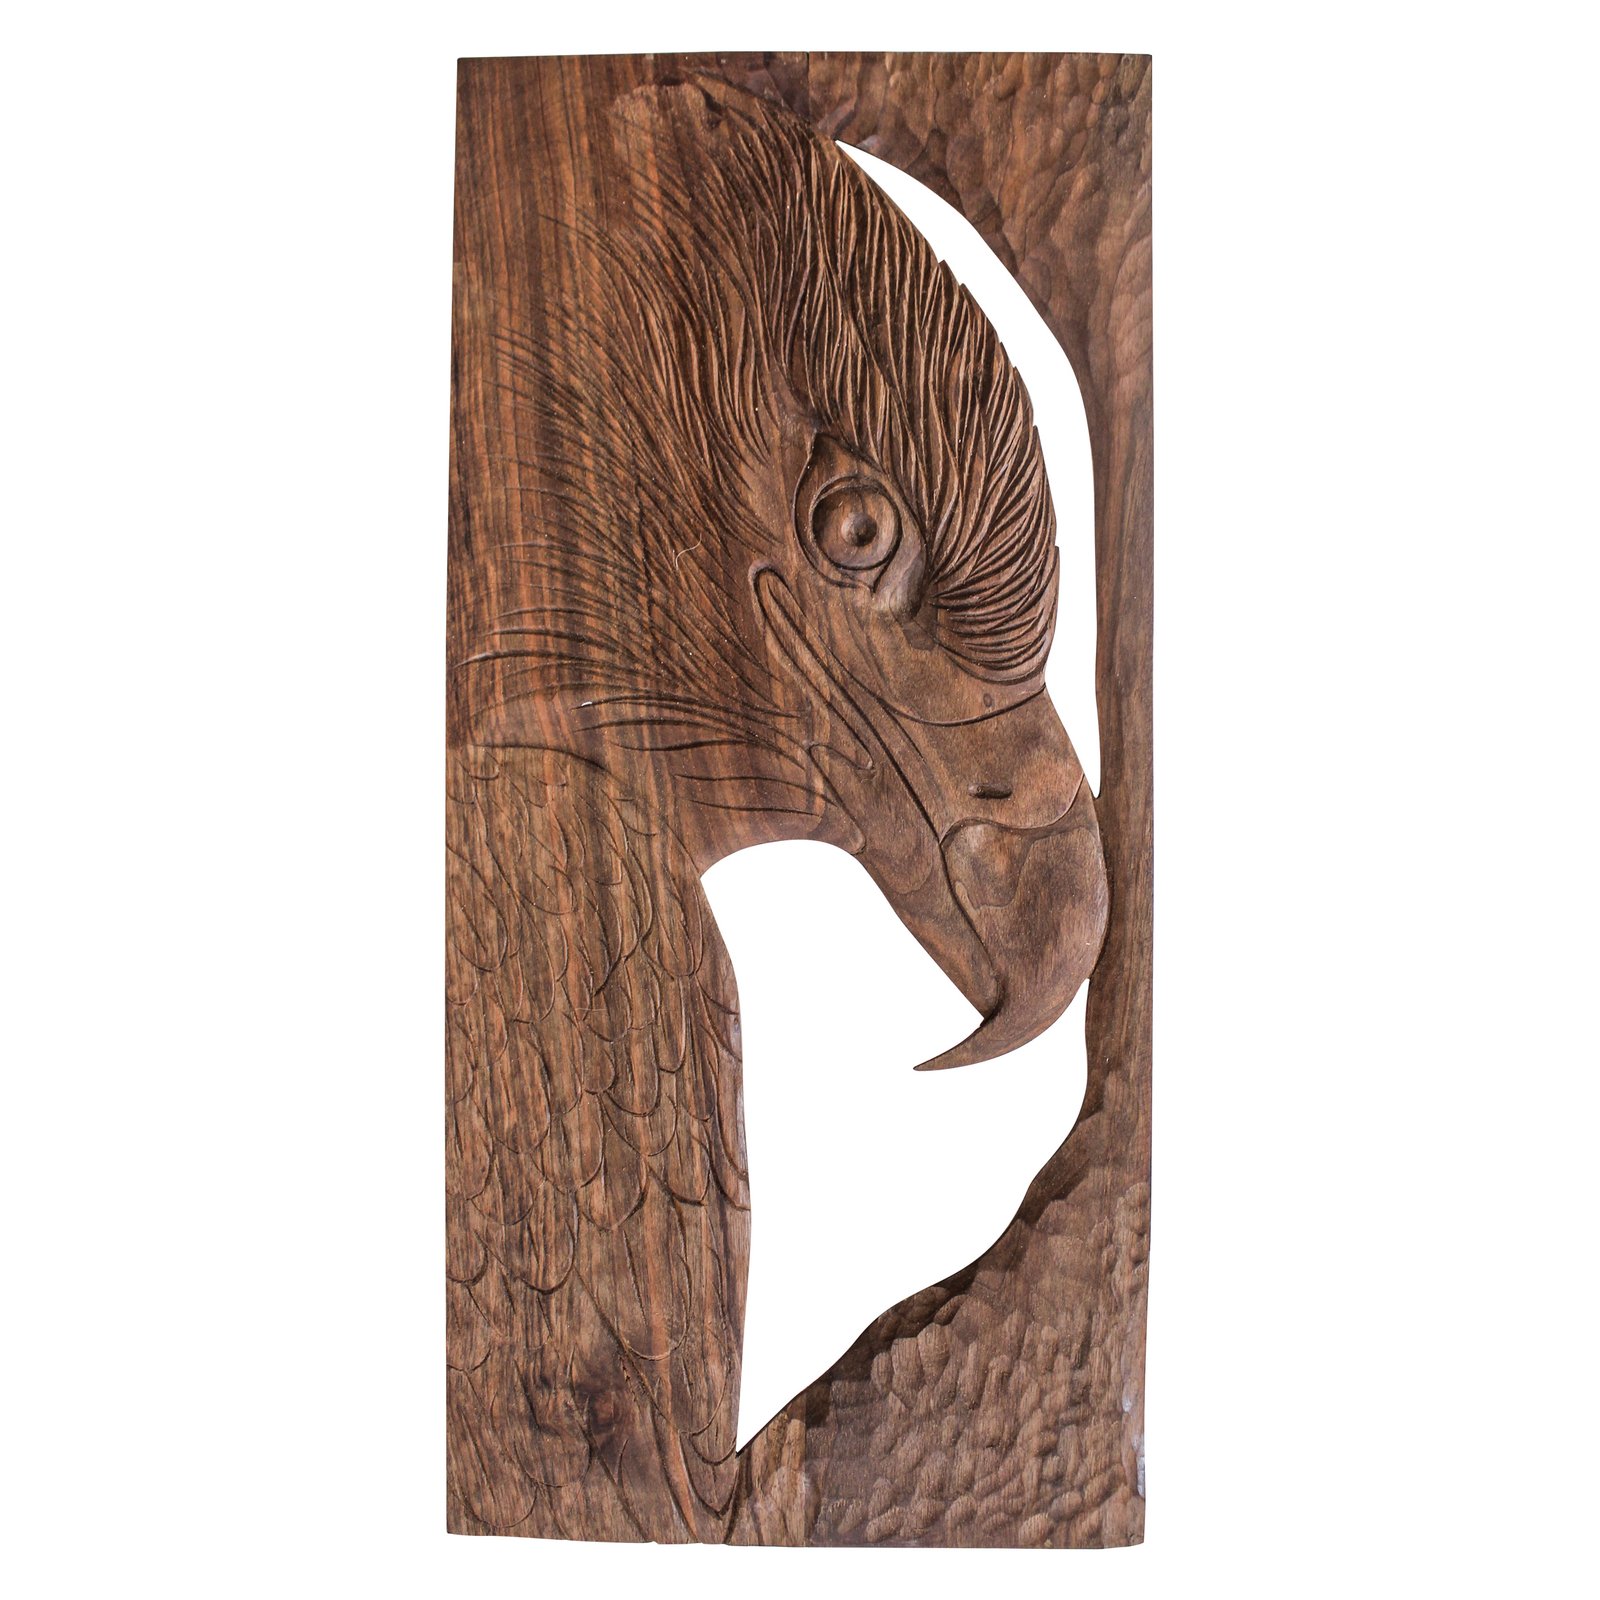 Handmade Wood Carving tableau Eagle design code 4000,Handmade Wood Carving tableau,Woodcarvings prices,price of Woodcarving dish